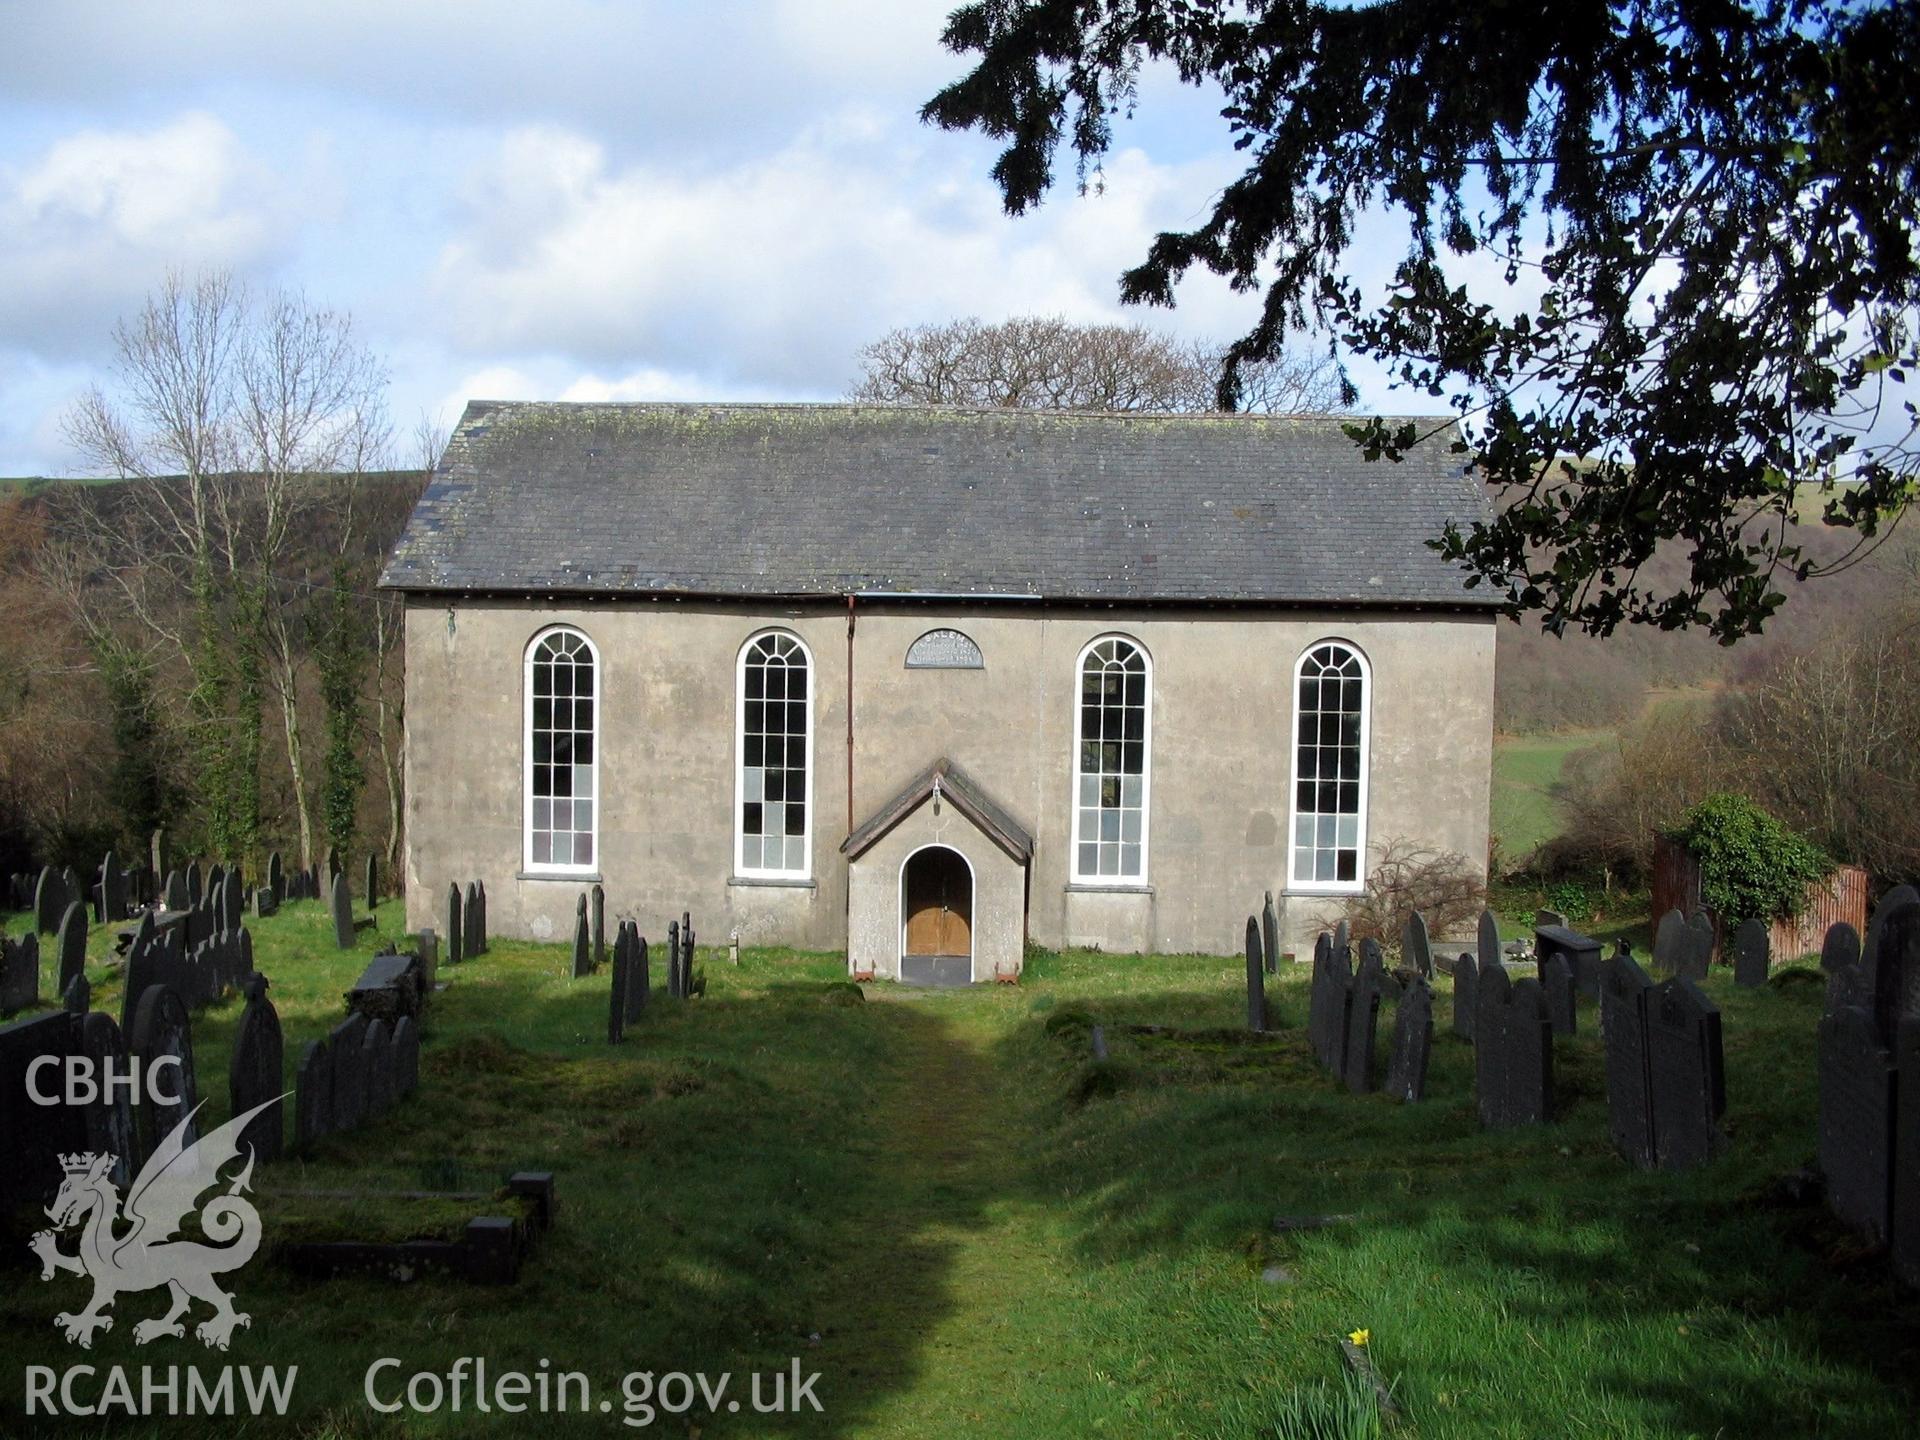 Colour digital photograph showing the front exterior of the Salem Welsh Independent Chapel, Trefeurig.